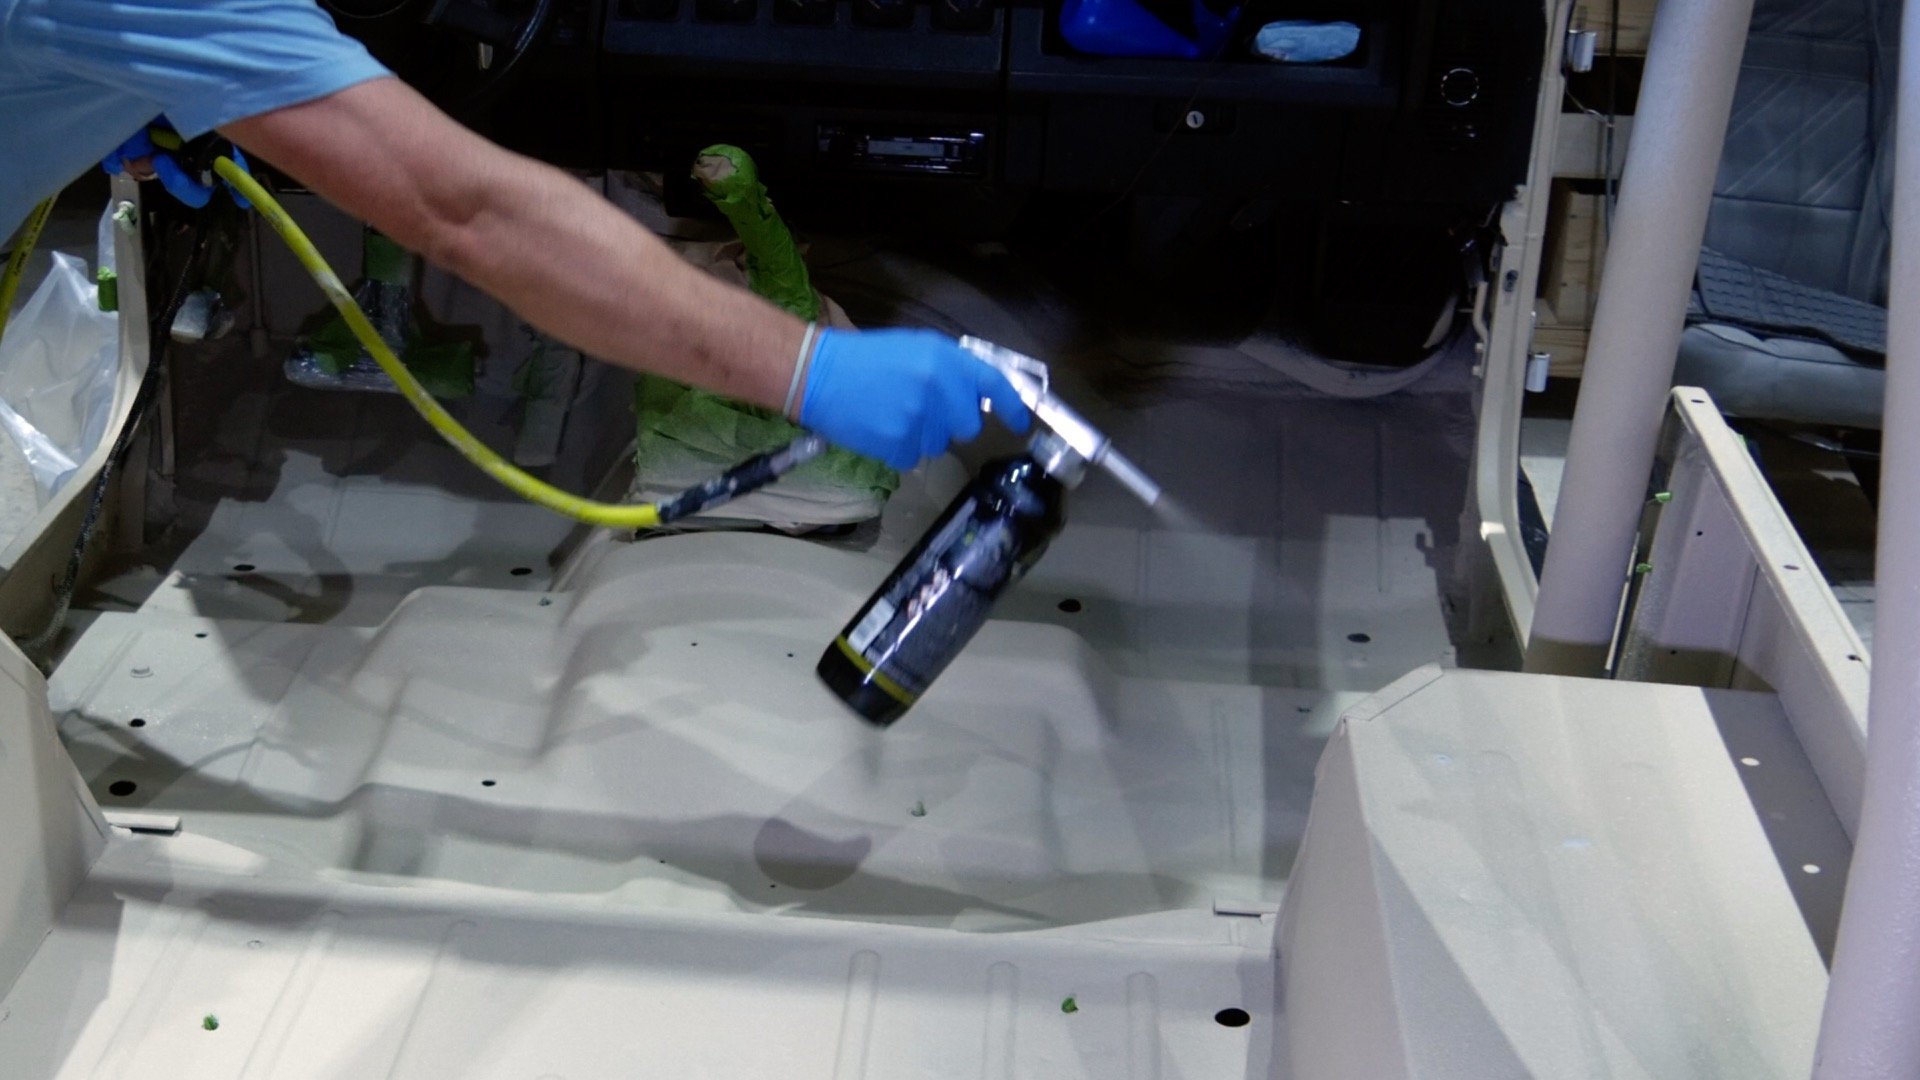 how to spray bed liner in a jeep wrangler interior_second coat